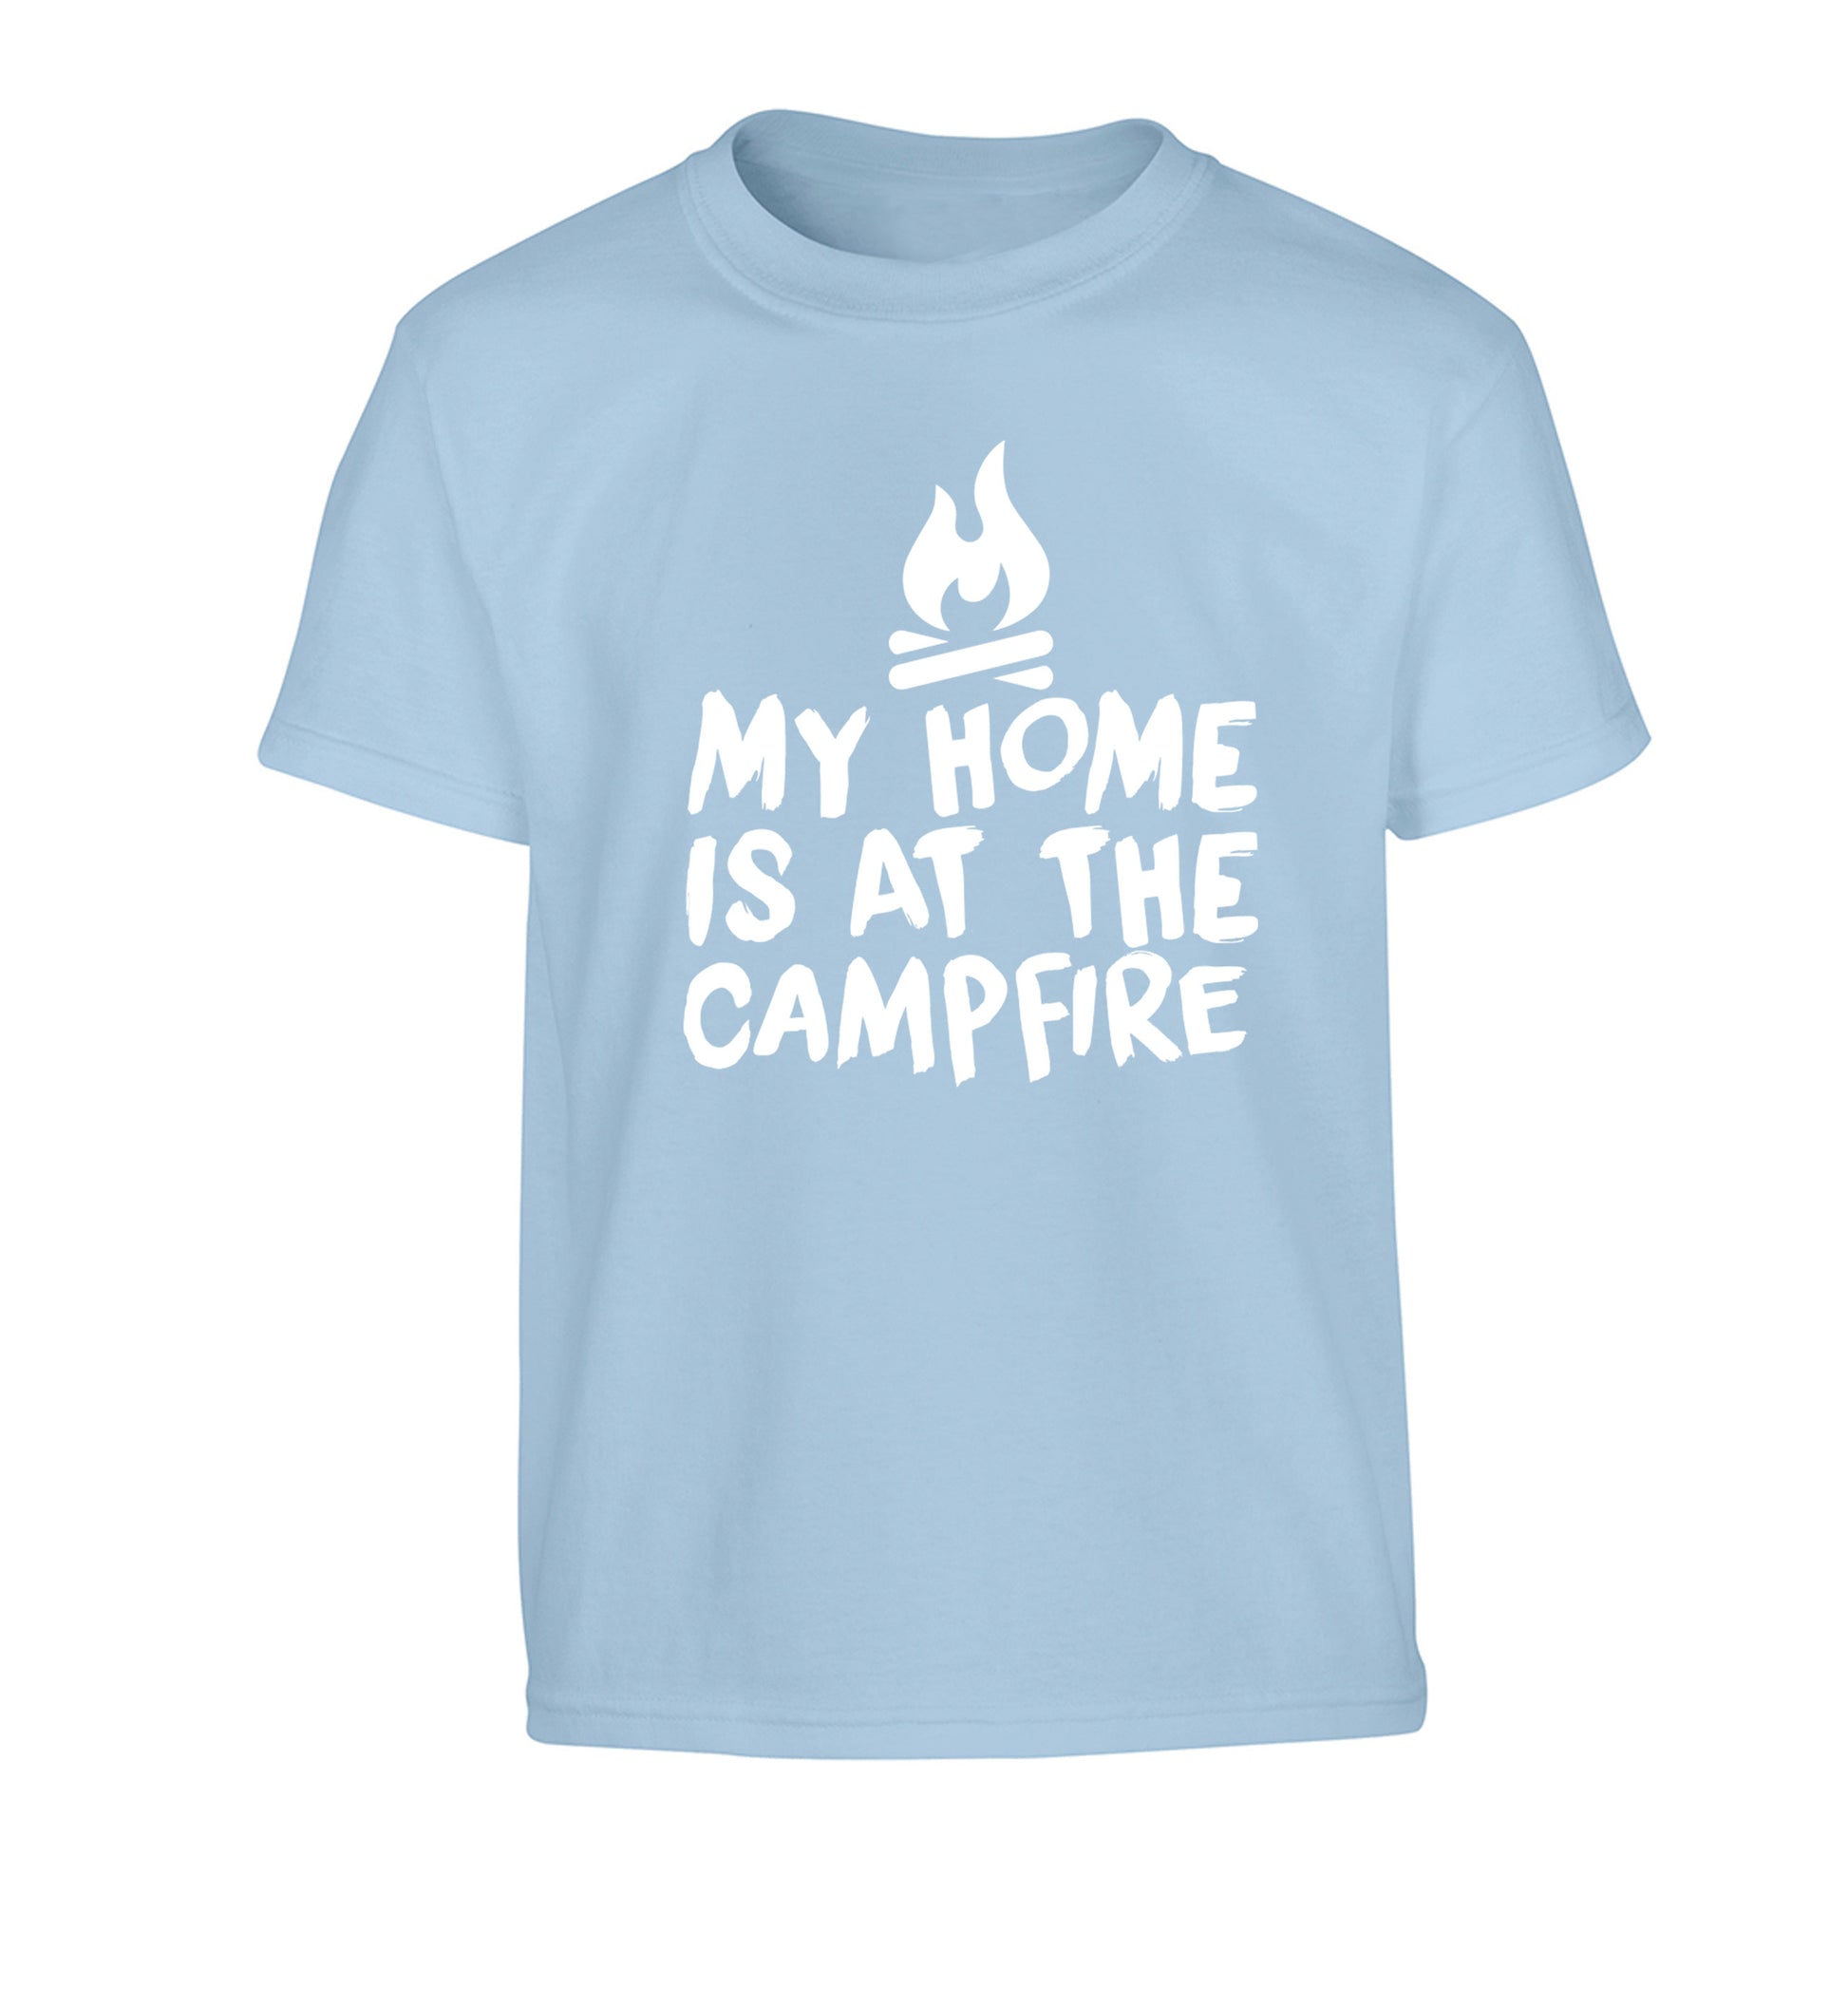 My home is at the campfire Children's light blue Tshirt 12-14 Years